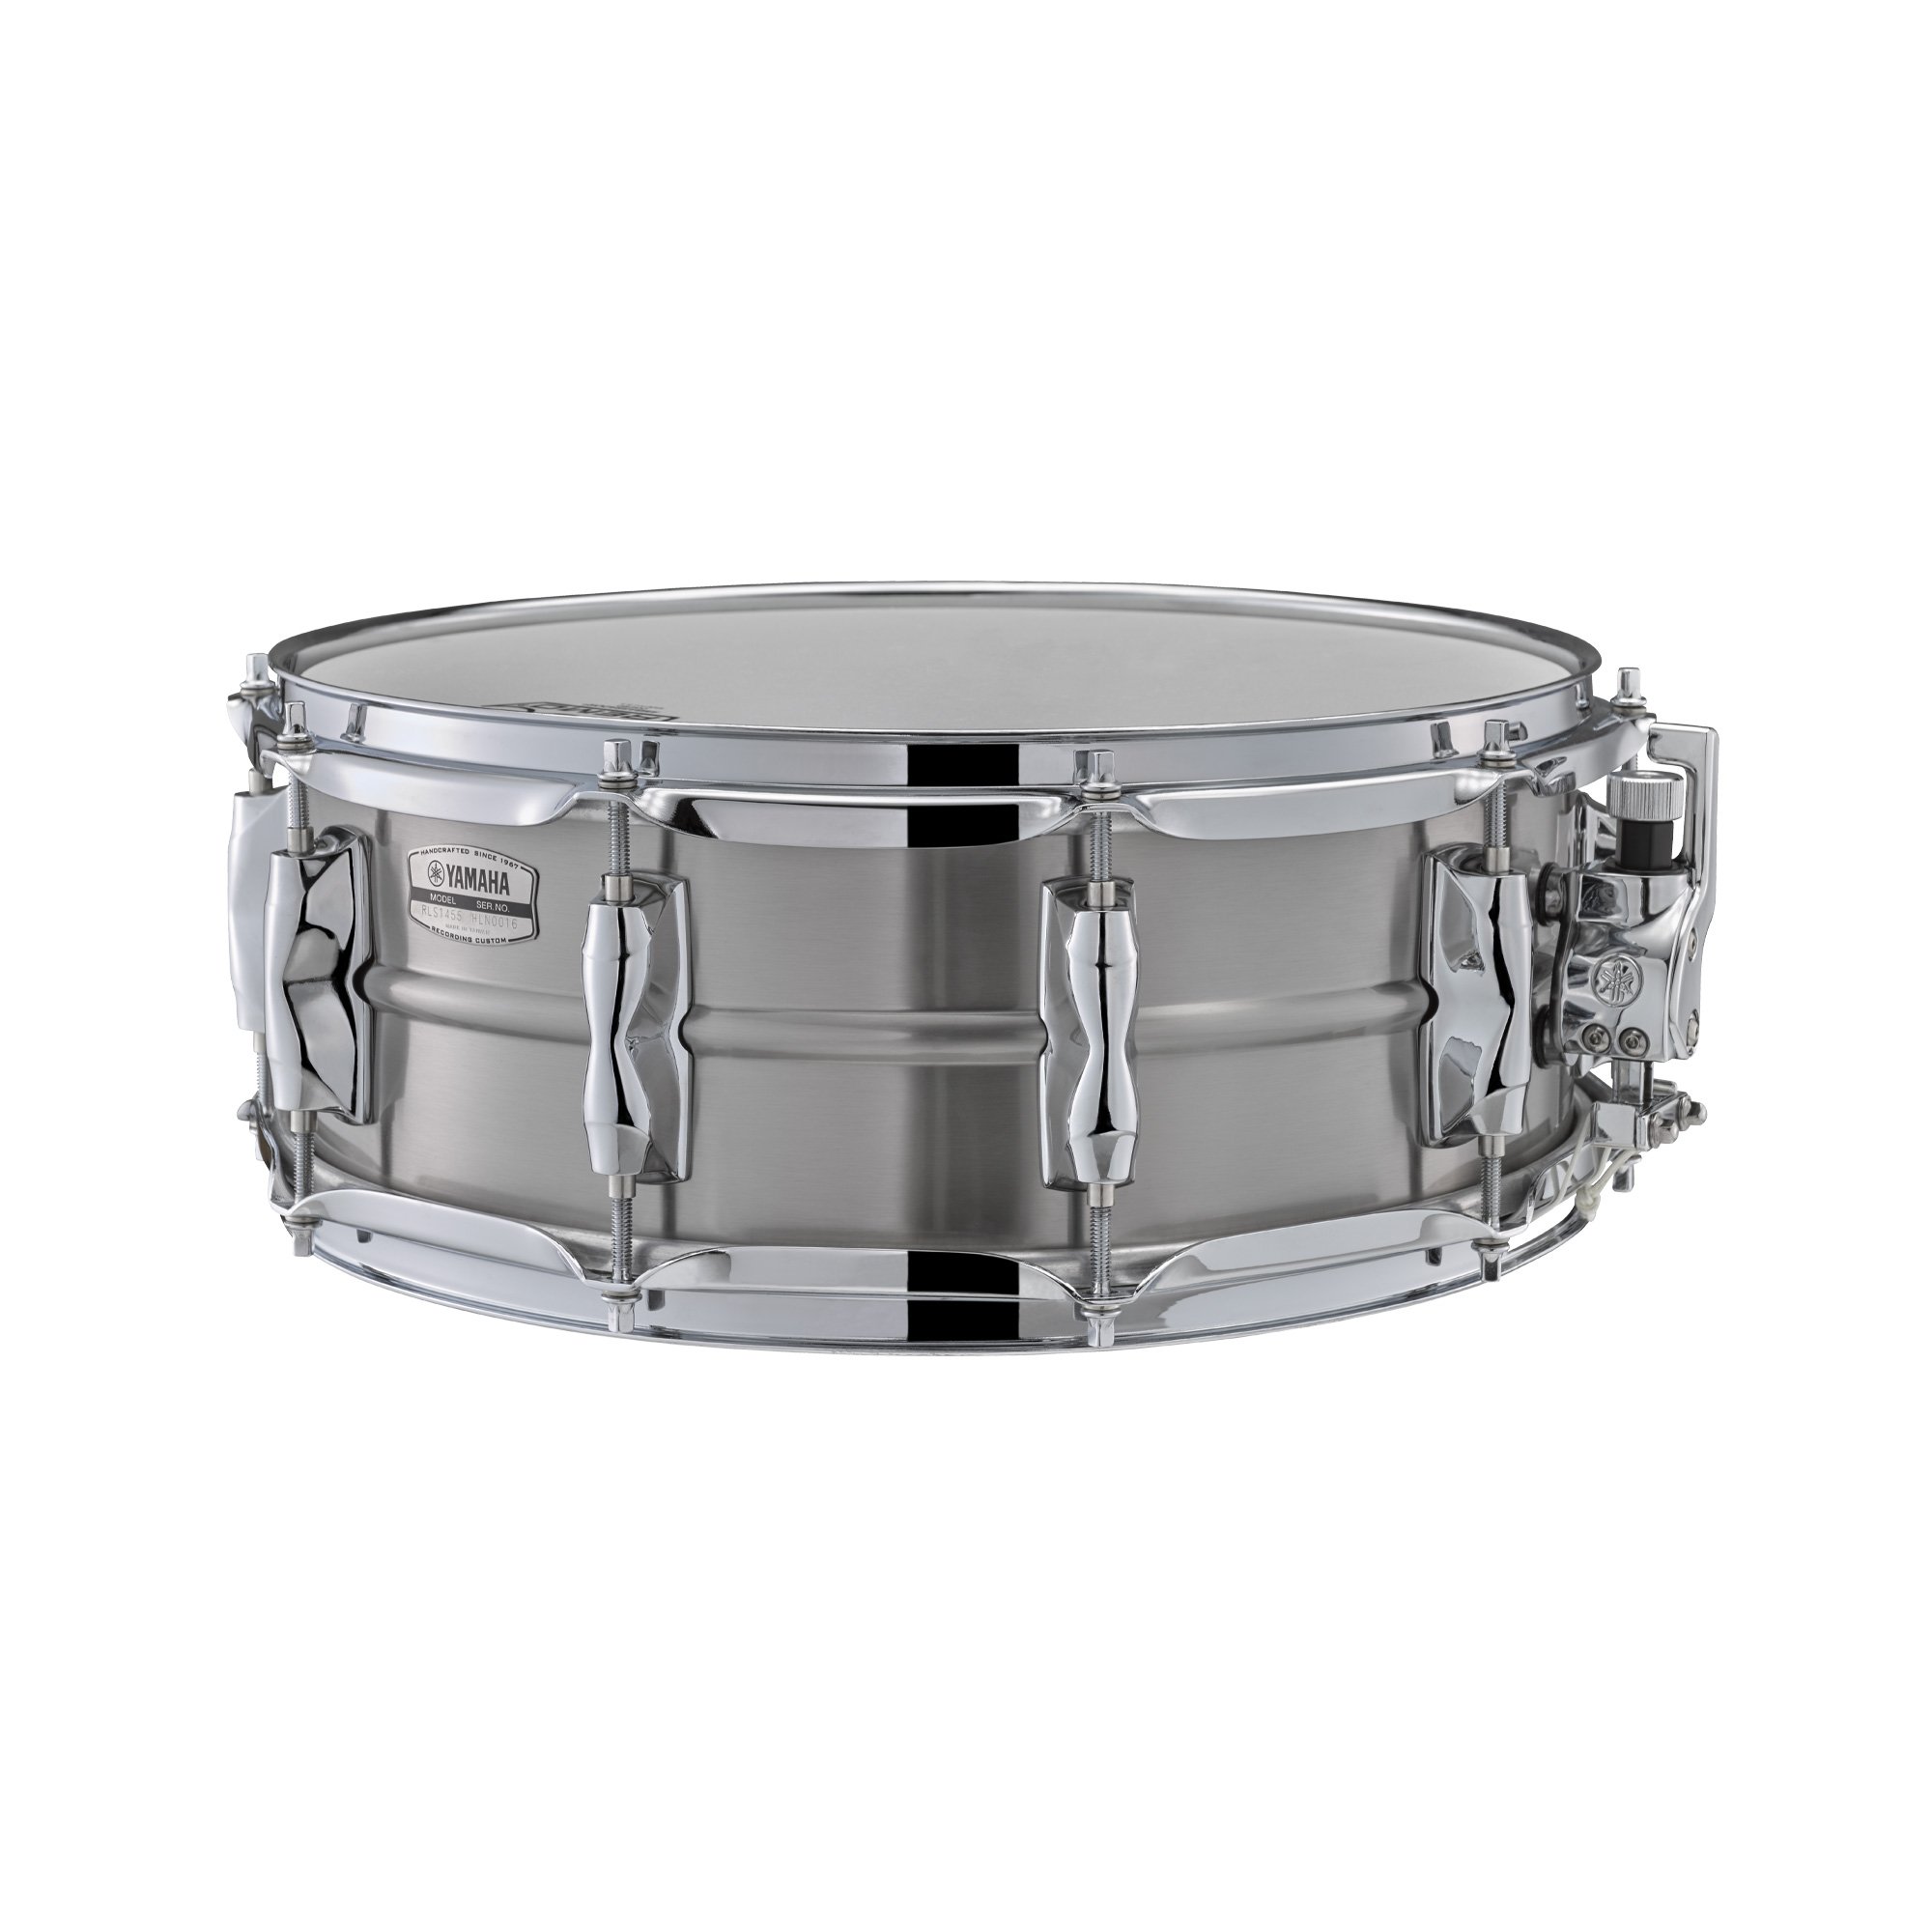 Recording Custom Stainless Steel Snare Drums - Overview - Snare 